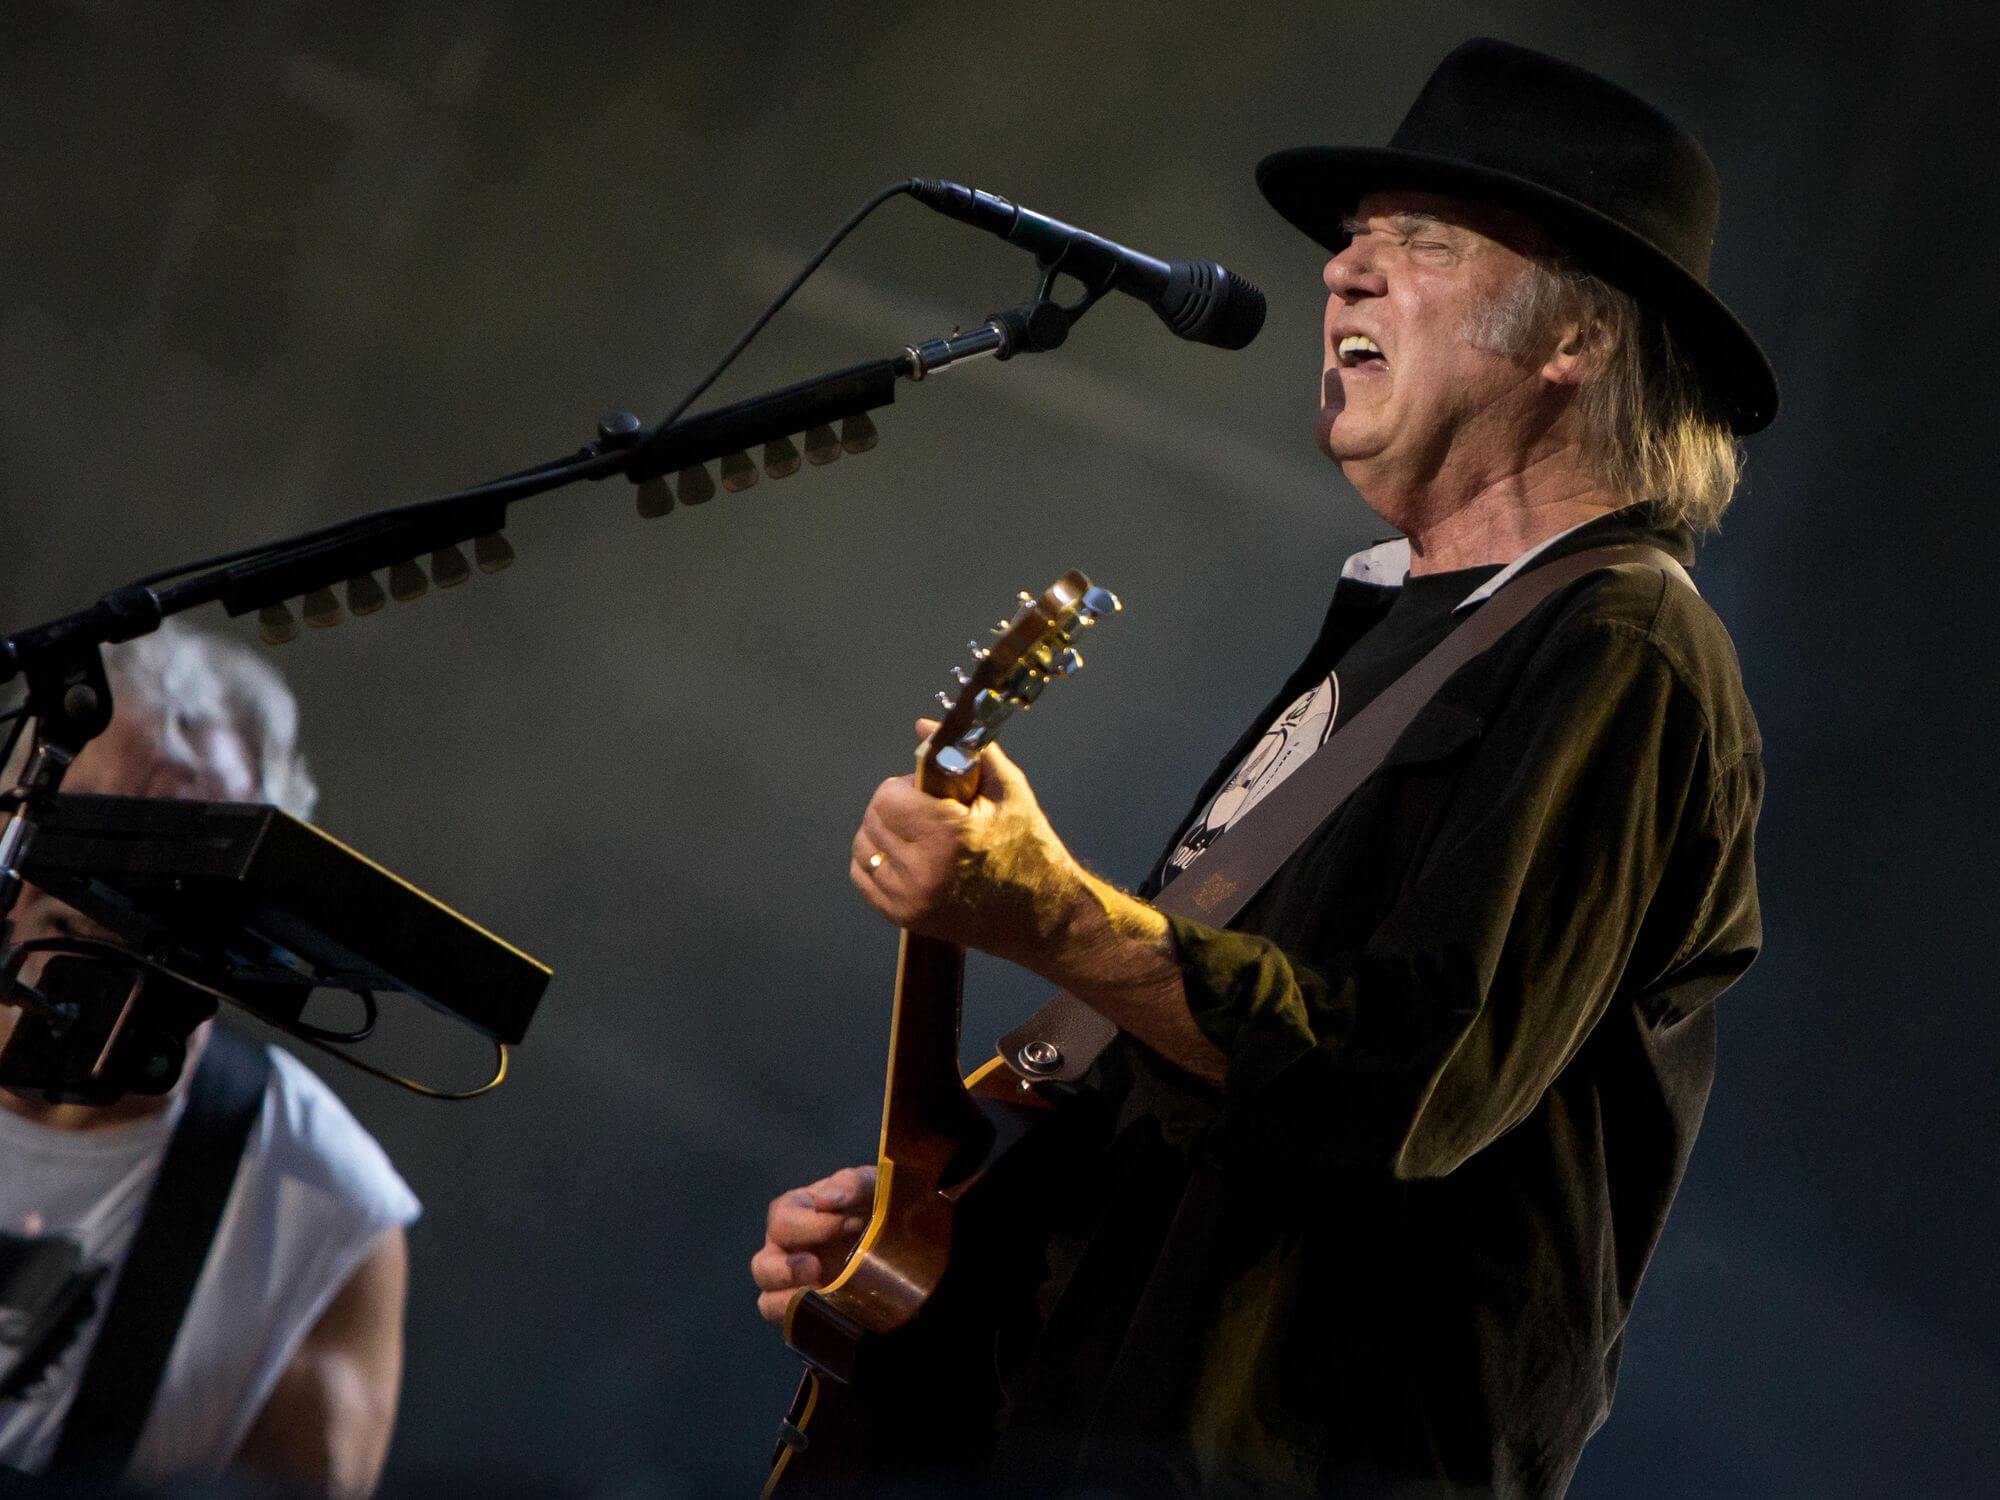 Neil Young Performing